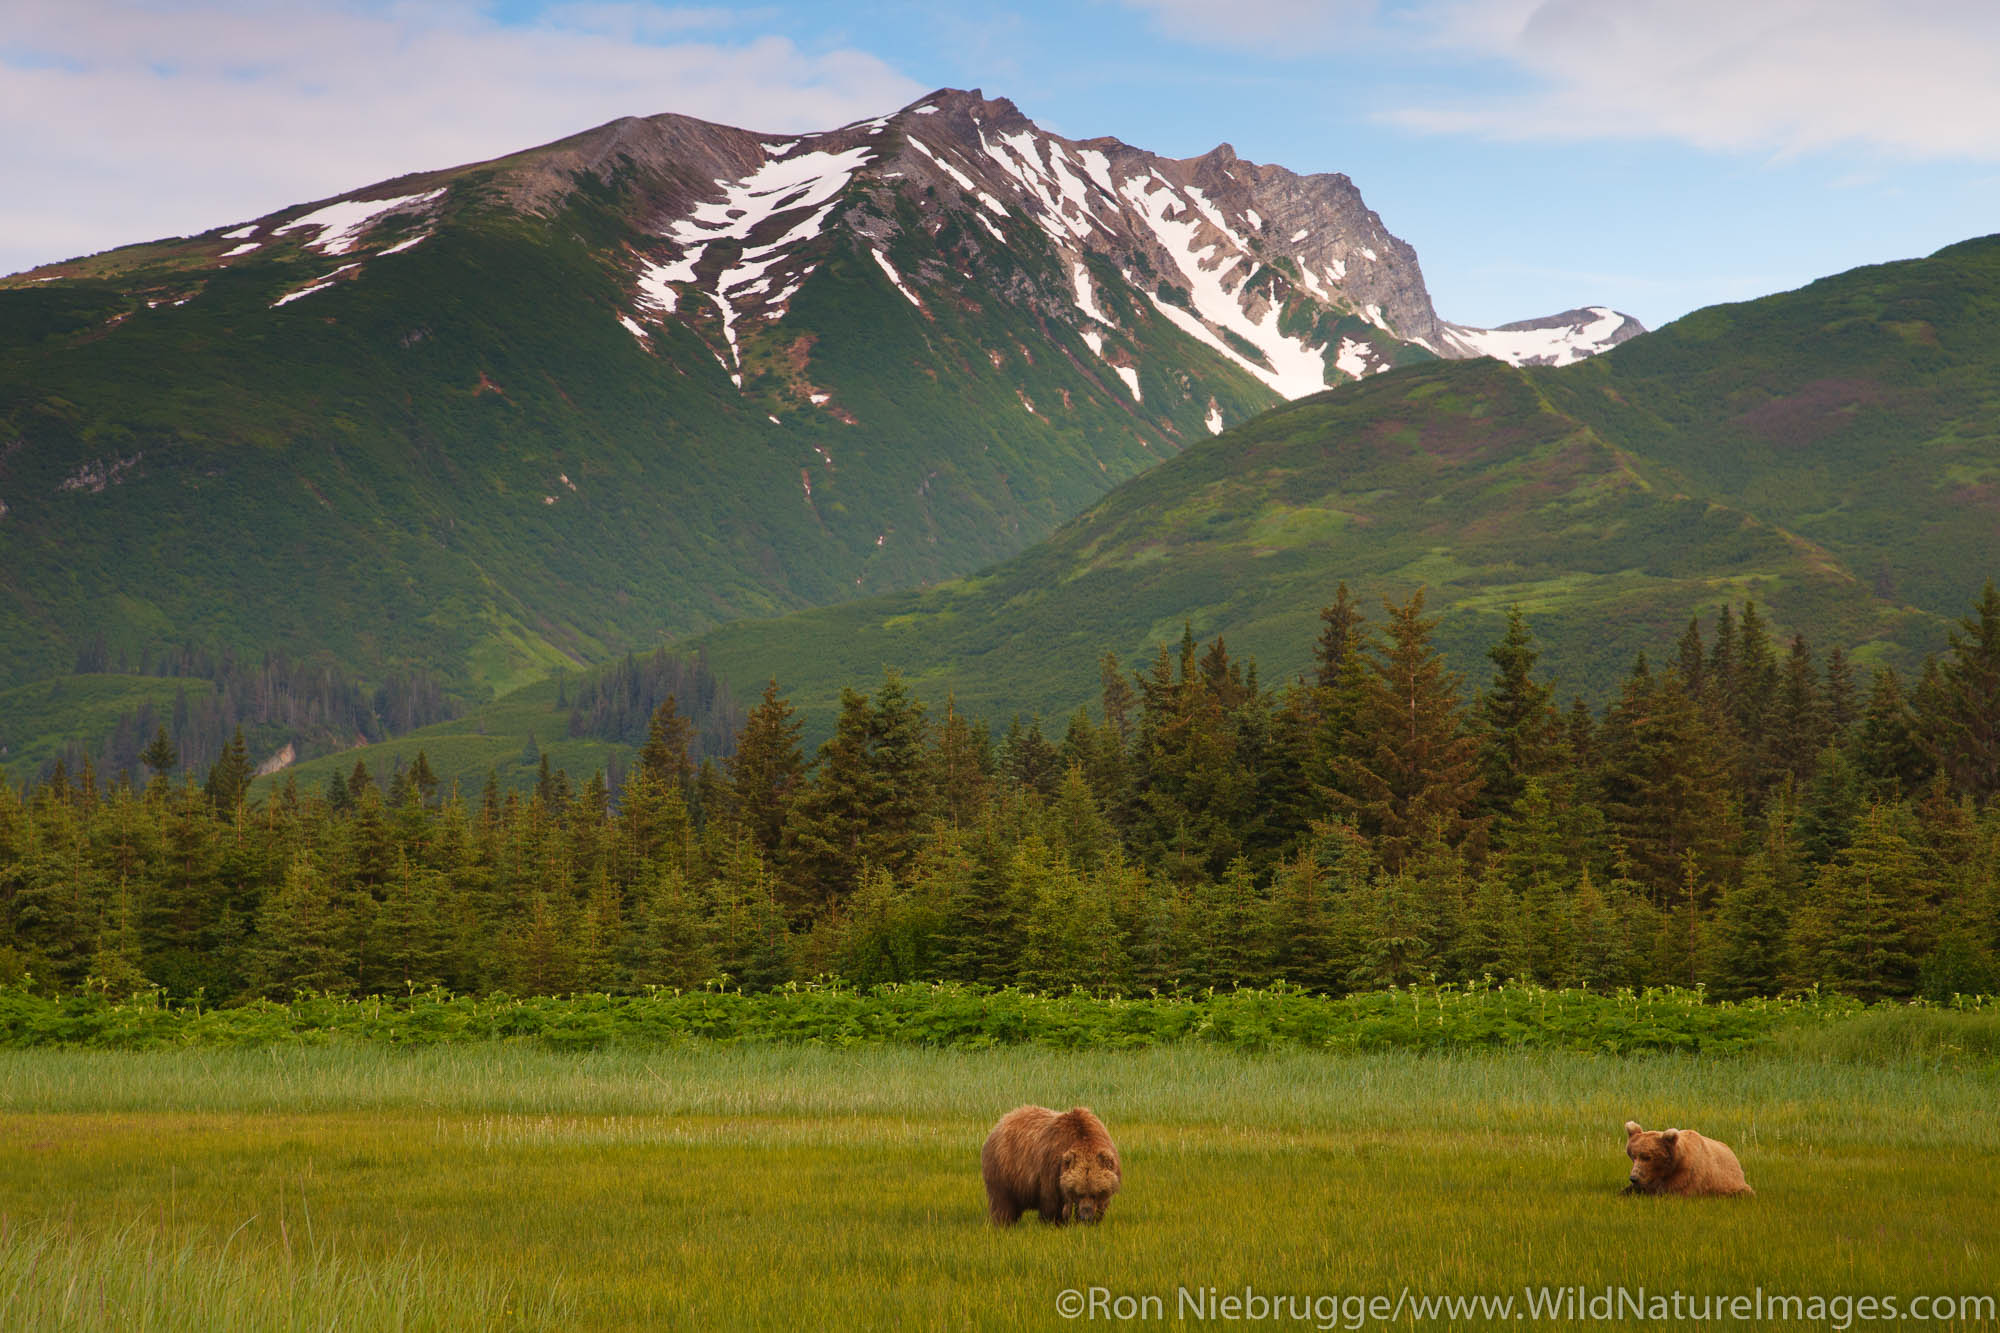 A Brown or Grizzly Bear boar watches sow during mating season, Lake Clark National Park, Alaska.